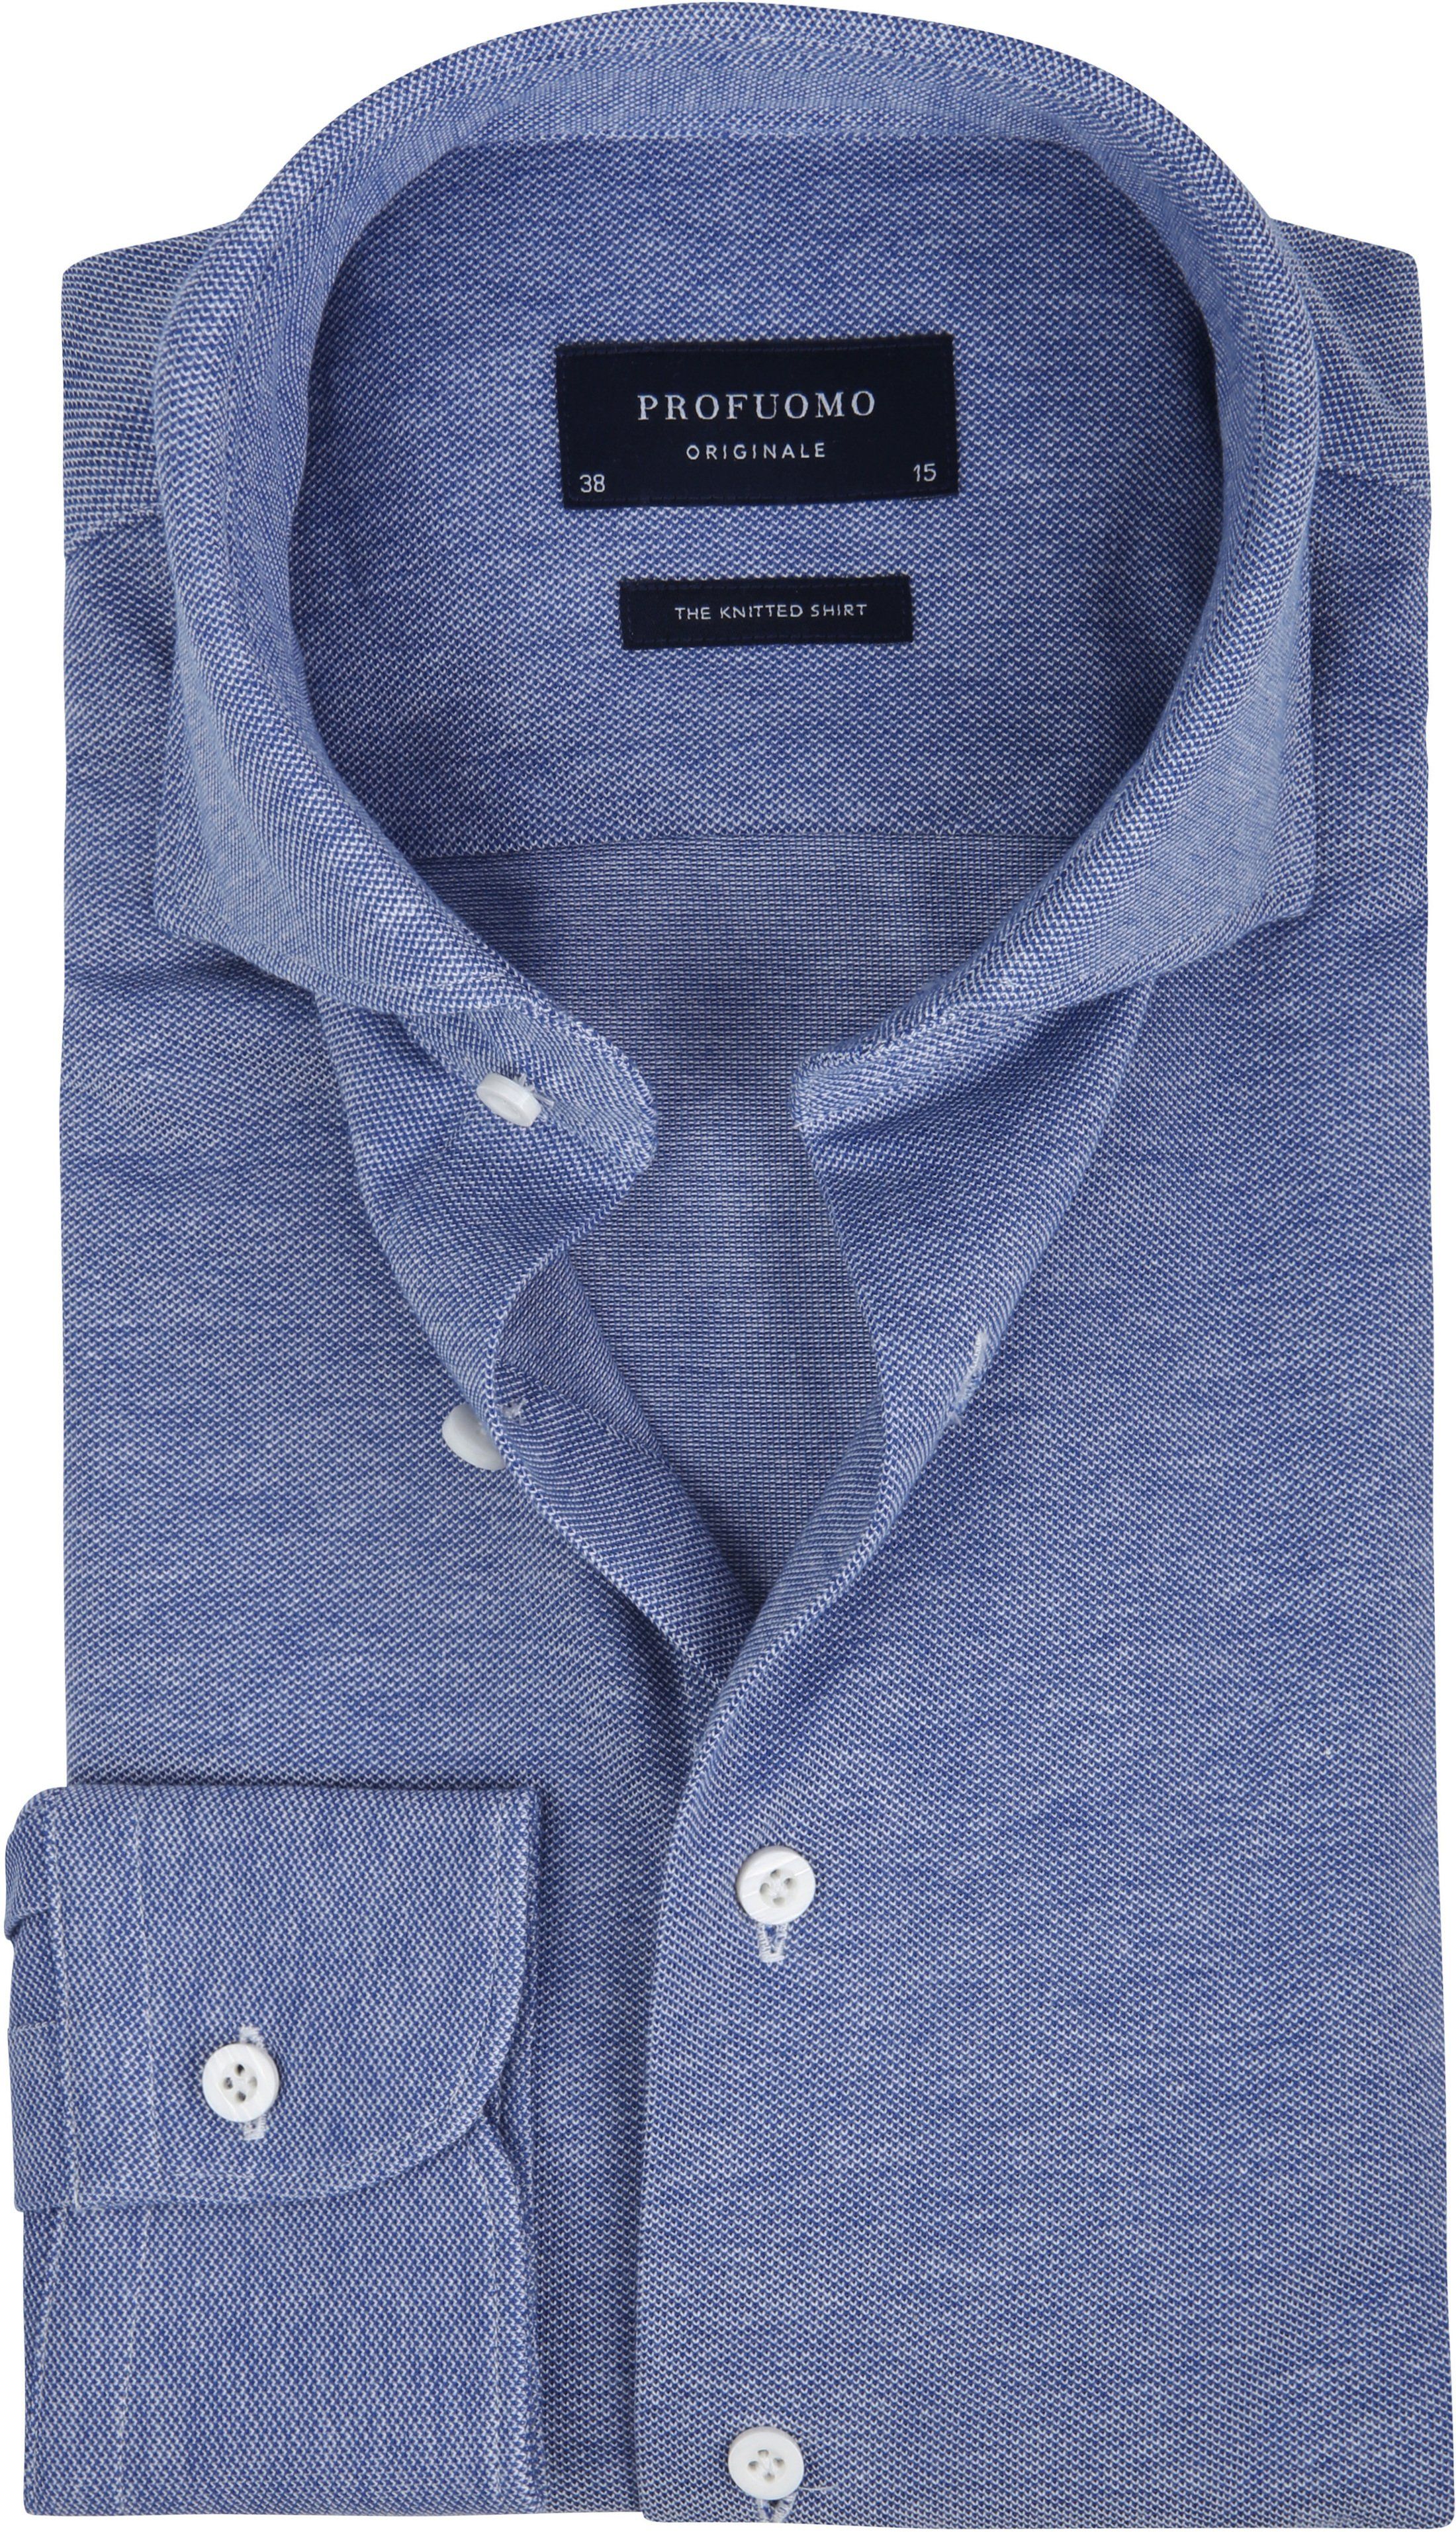 Profuomo Shirt Knitted Mid Blue size 14.5